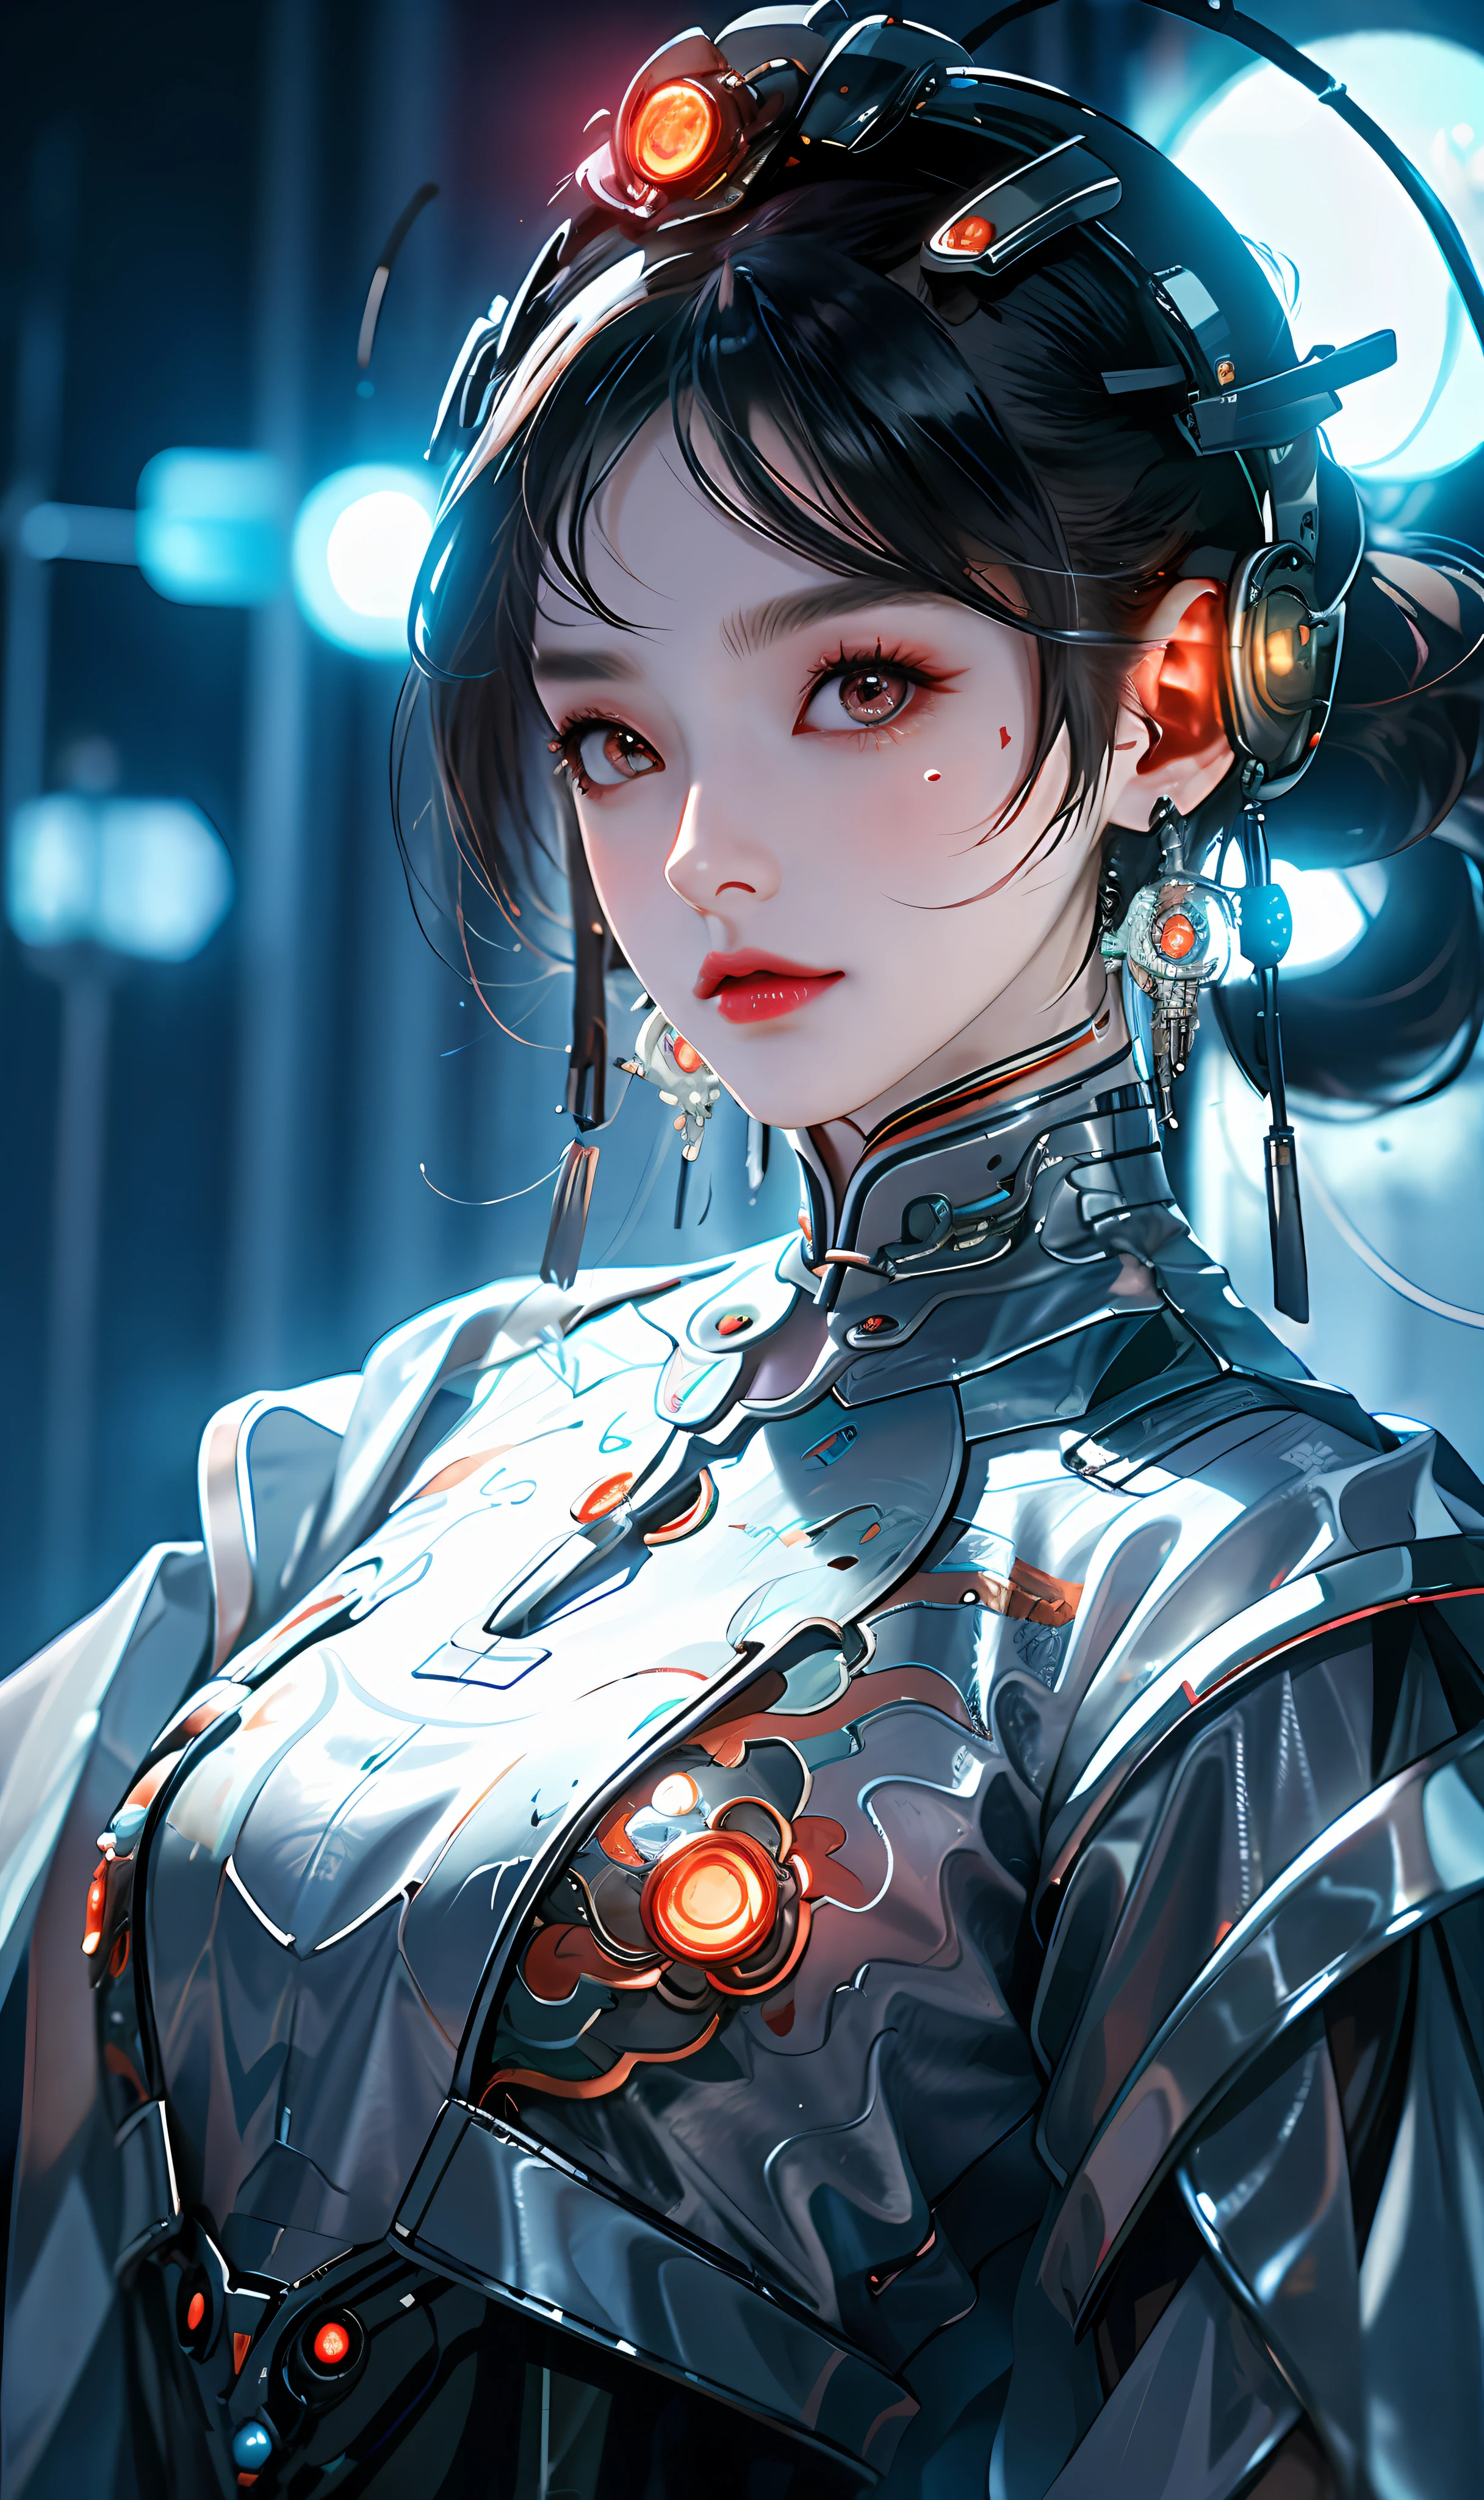 1 girl, Chinese_clothes, liquid silver and orange, cyberhan, cheongsam, cyberpunk city, dynamic pose, detailed luminous headphones, glowing hair accessories, long hair, glowing earrings, glowing necklace, cyberpunk, high-tech city, full of mechanical and futuristic elements, futuristic, technology, glowing neon, orange, orange light, transparent tulle, transparent streamers, laser, digital background urban sky, big moon, with vehicles, best quality, masterpiece, 8K, character edge light, Super high detail, high quality, the most beautiful woman in human beings, micro smile, face facing front and left and right symmetry, ear decoration, beautiful pupils, light effects, visual data, silver white hair, super detail facial texture